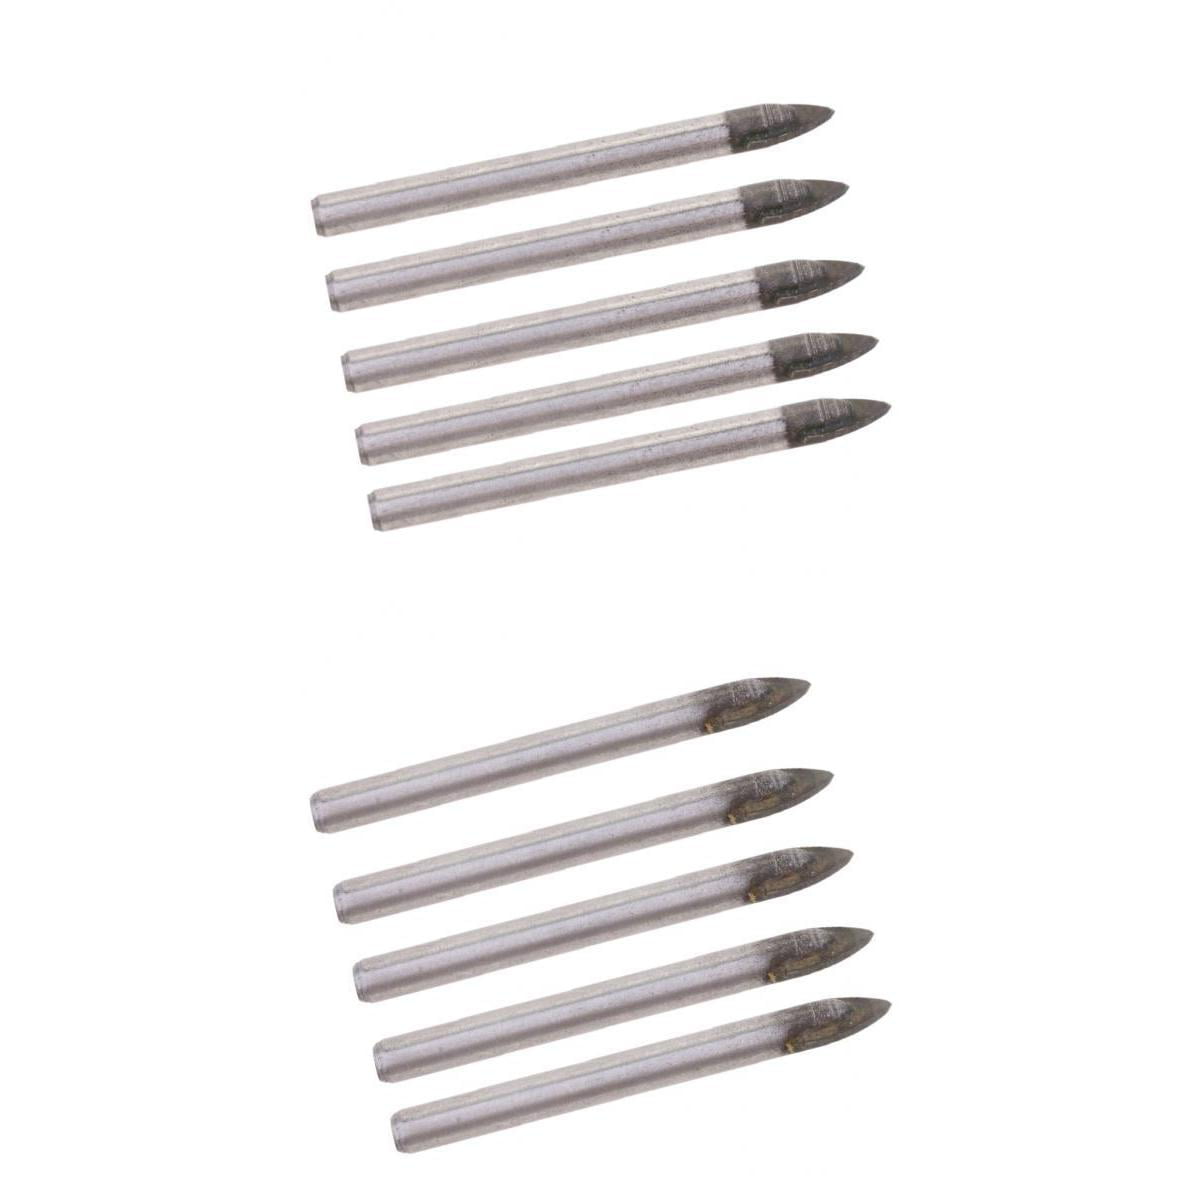 10x 8mm Drill Bits Set Crossed Point with Carbide Tips for Glass Mirror Tile 